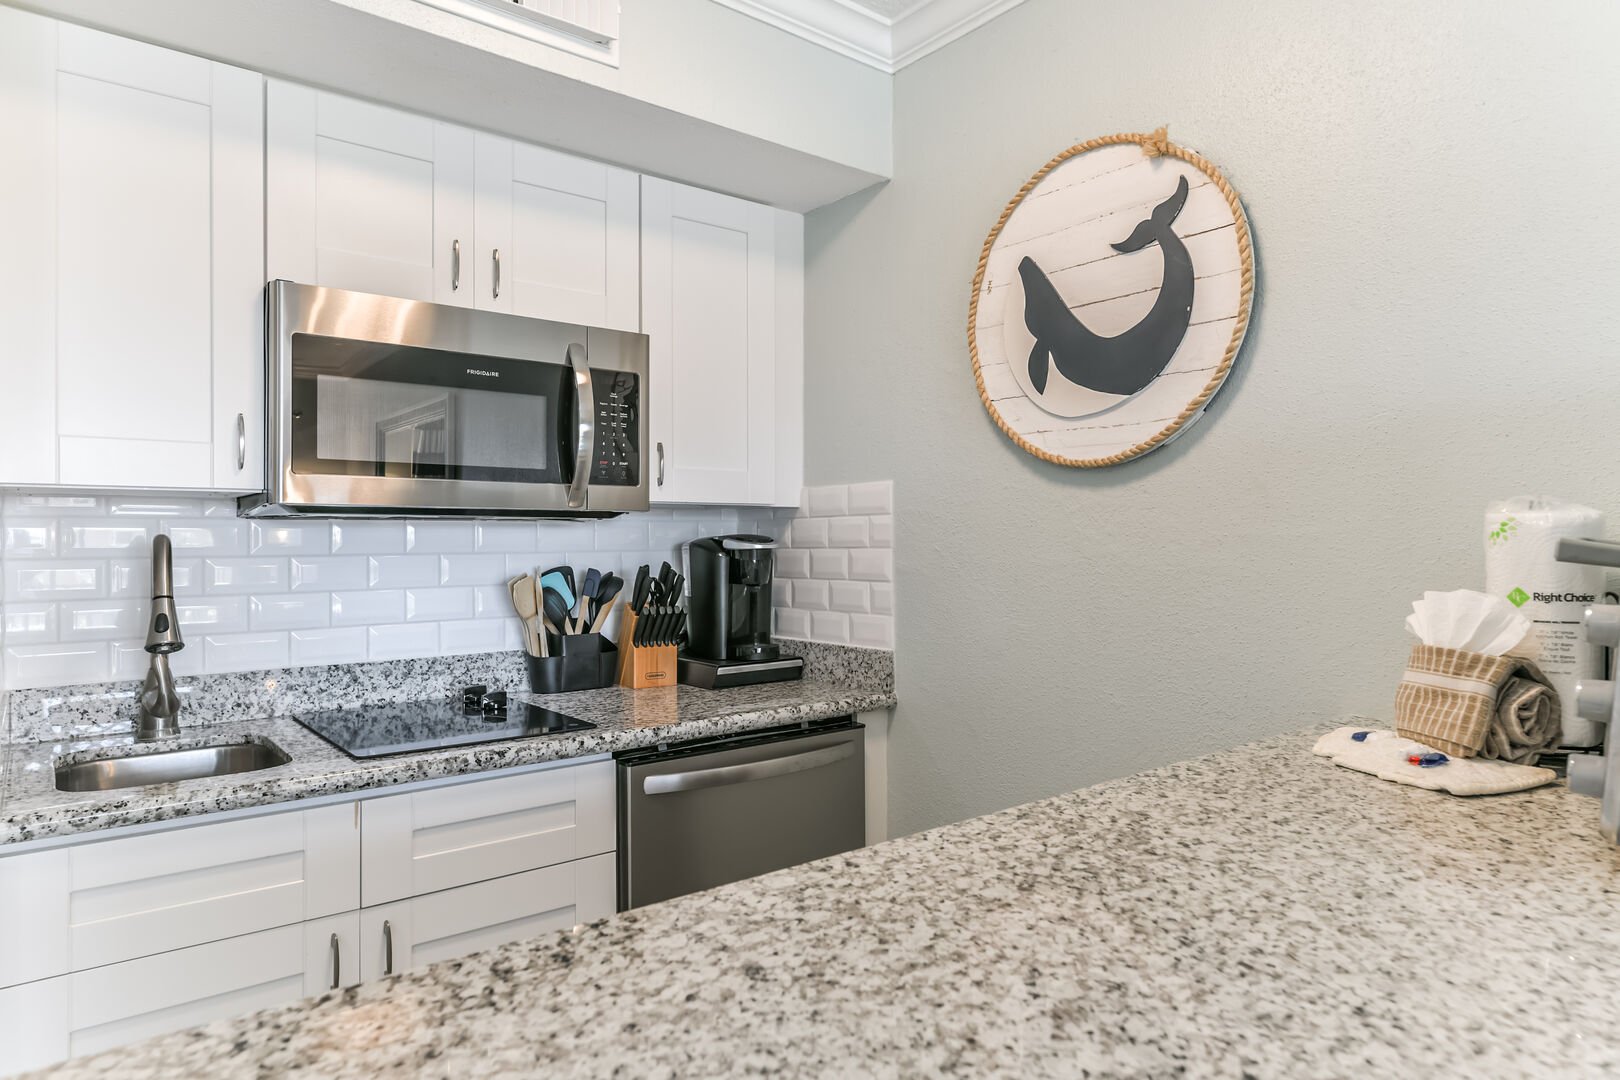 The kitchen is luxurious with all the amenities you could need